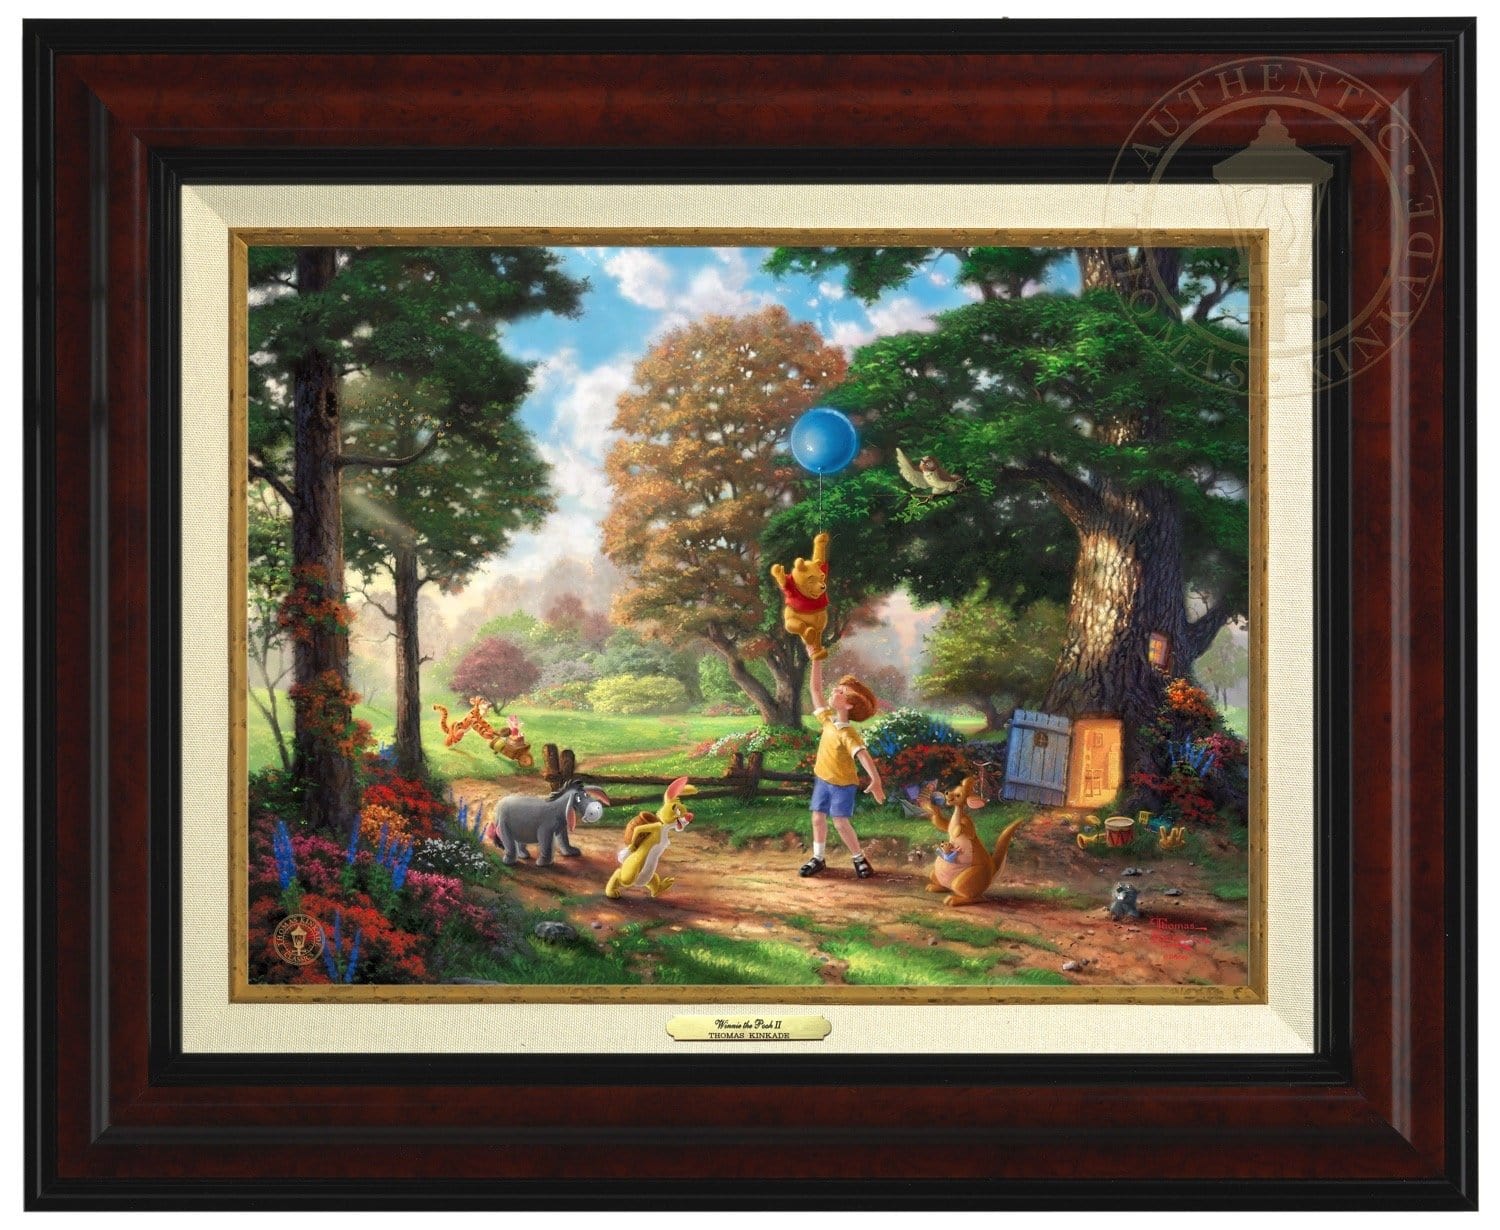 Winnie the Pooh II - Christopher Robin, Winnie the Pooh and the delightful menagerie of friends as they all adventured in the Hundred Acre Wood - Burl Frame.